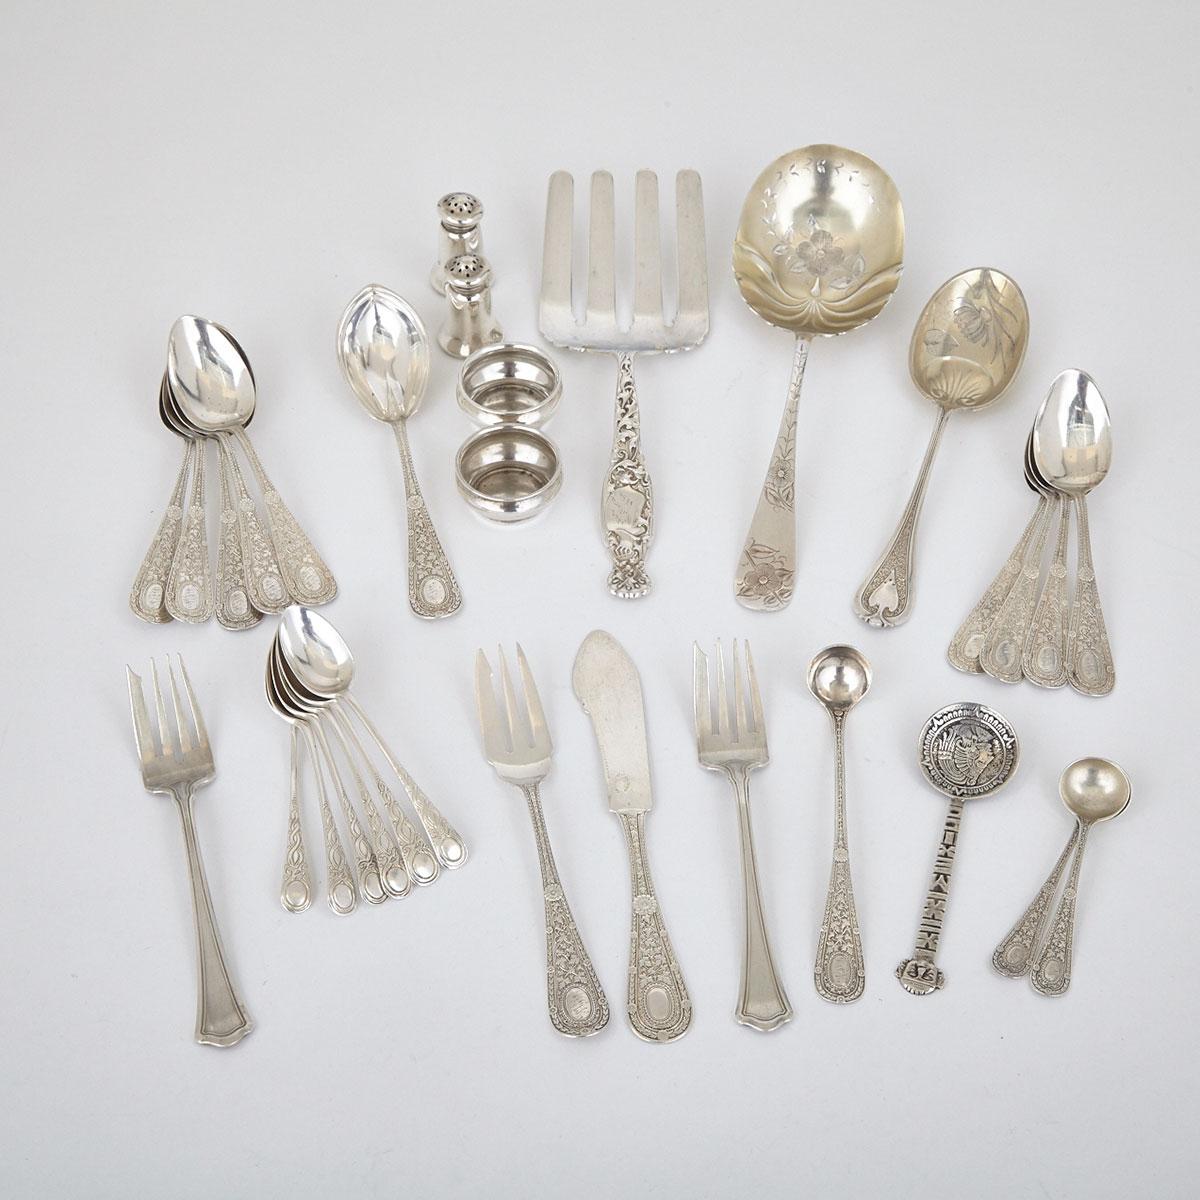 Grouped Lot of Silver Flatware, various makers, 20th century